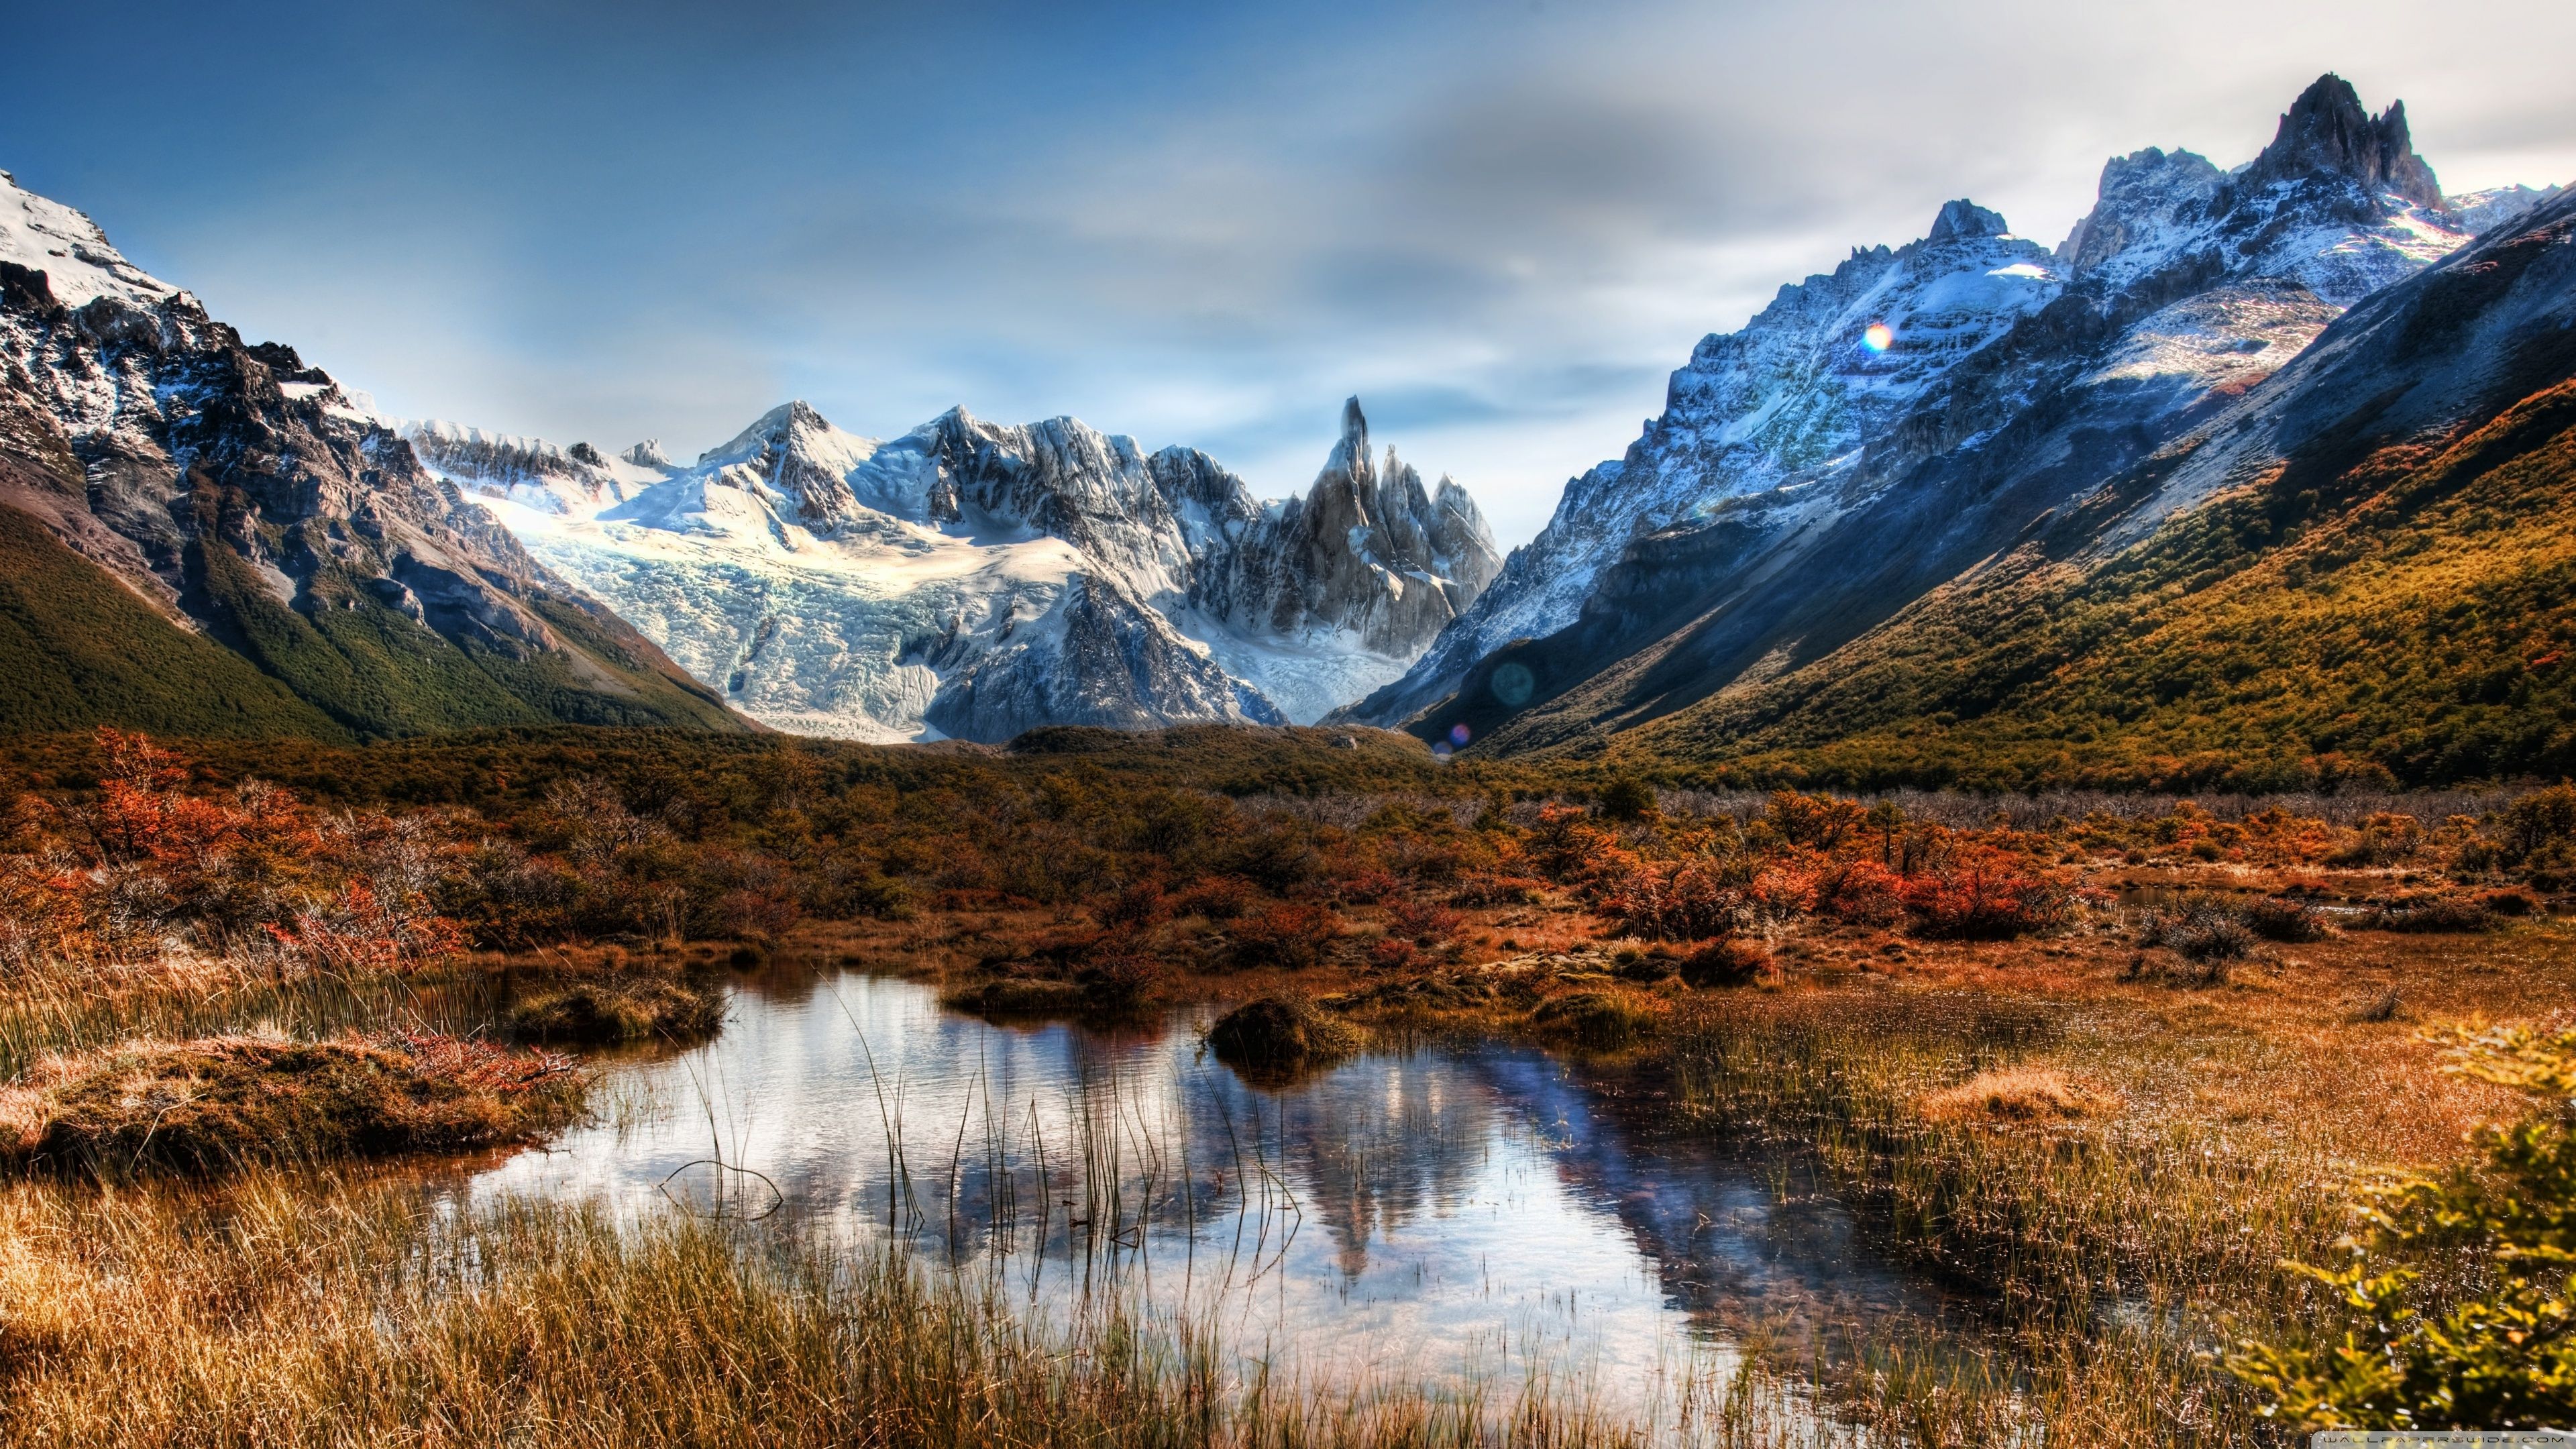 Four Argentina Itineraries For 10 Day & Shorter Trips